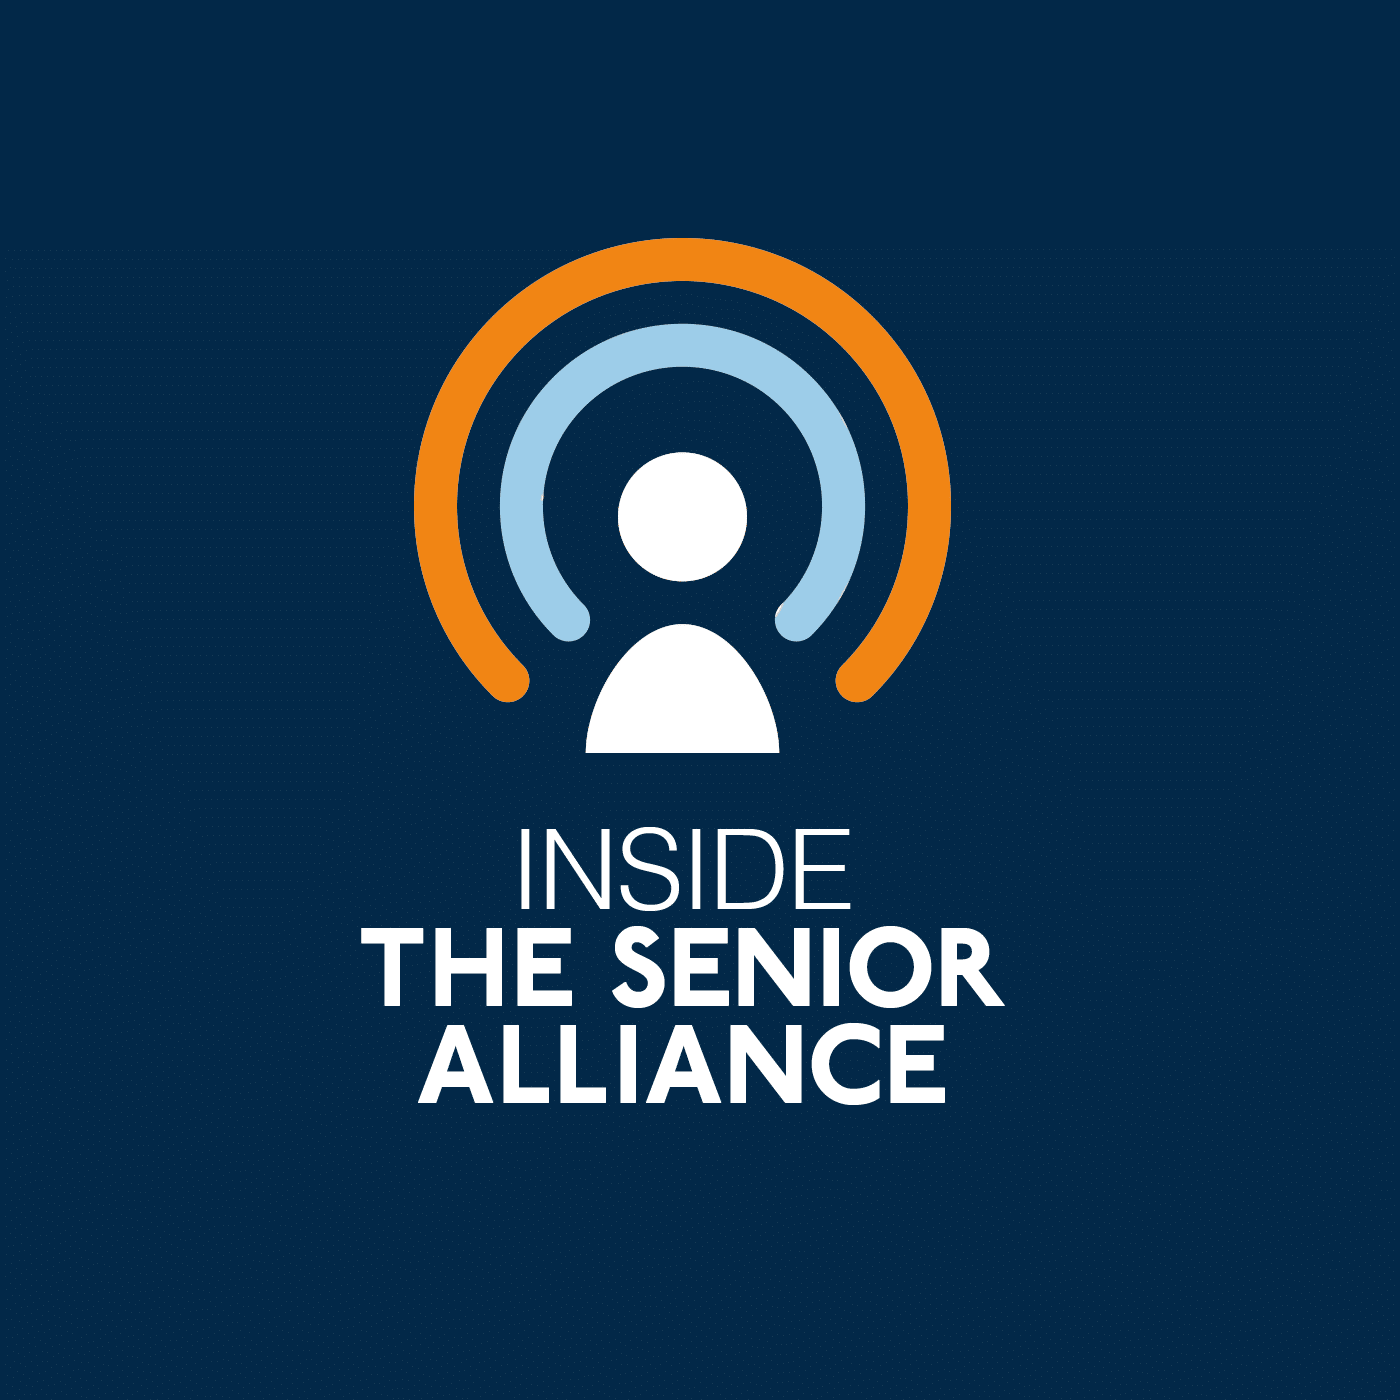 The podcast cover for Inside The Senior Alliance: It has a graphic of a broadcast symbol coming off of a person icon